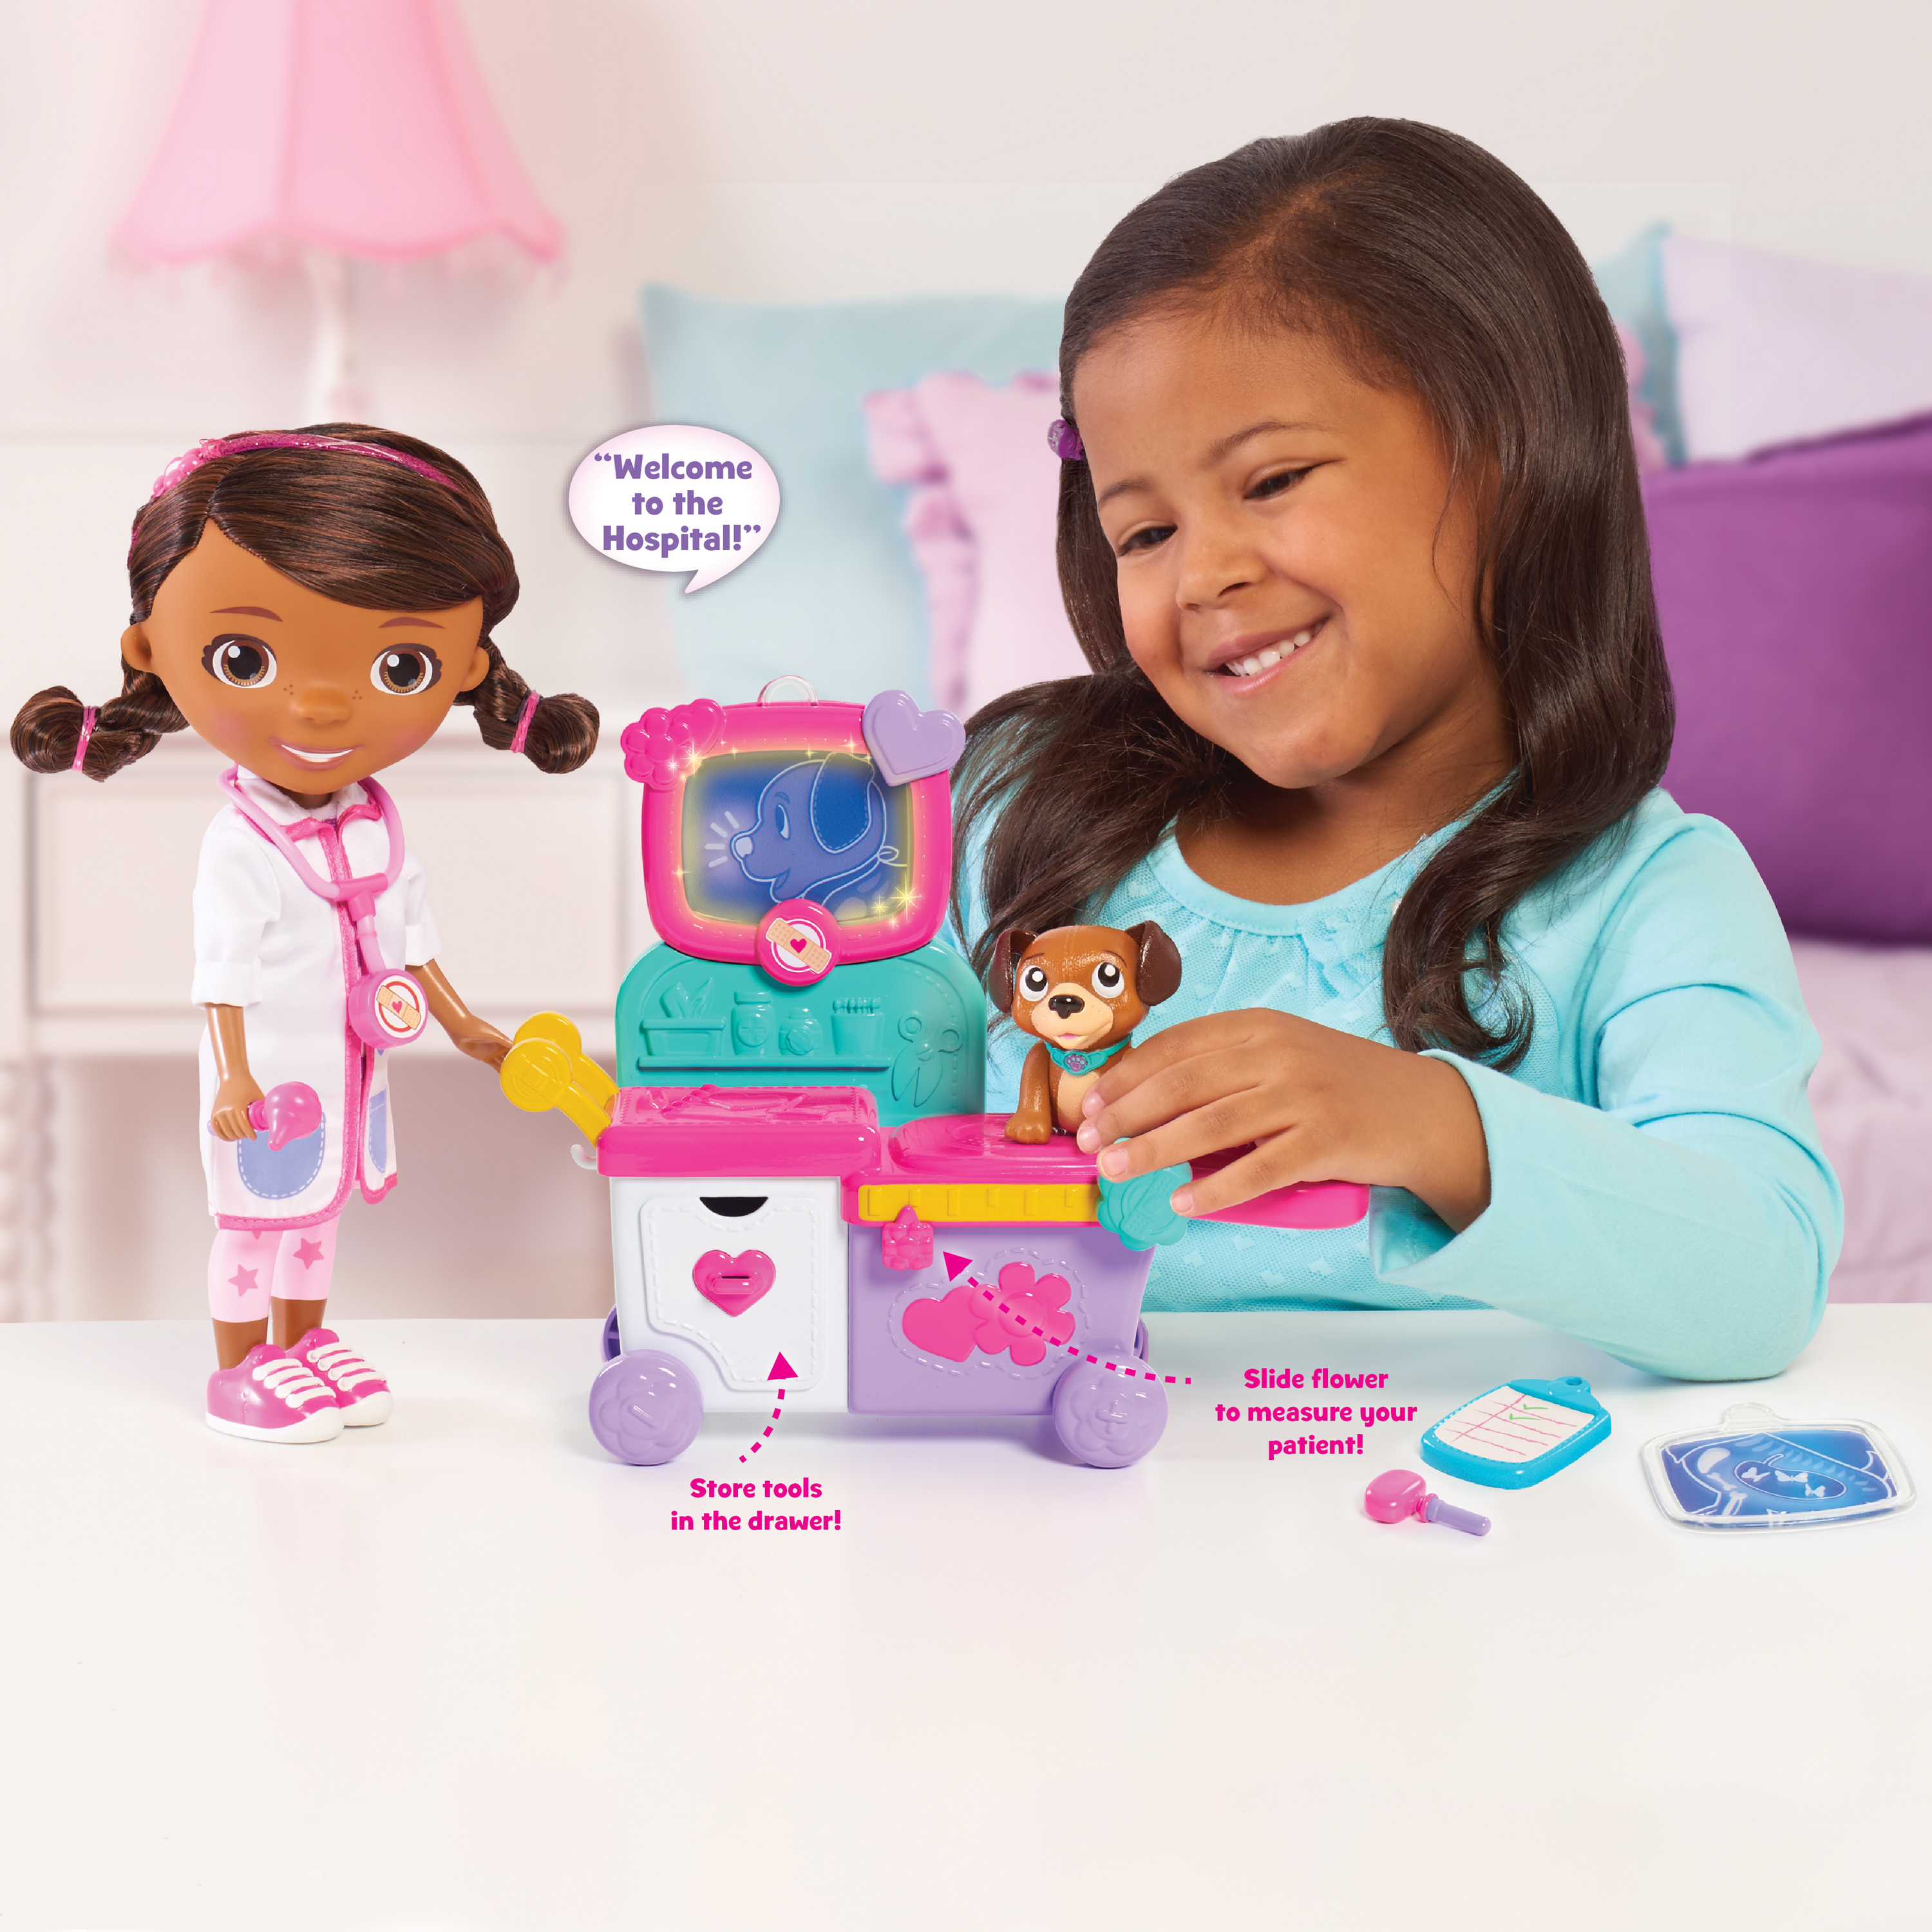 Doc McStuffins Magic Talking Doc & Care Cart for only $16.97 (was $32.34)